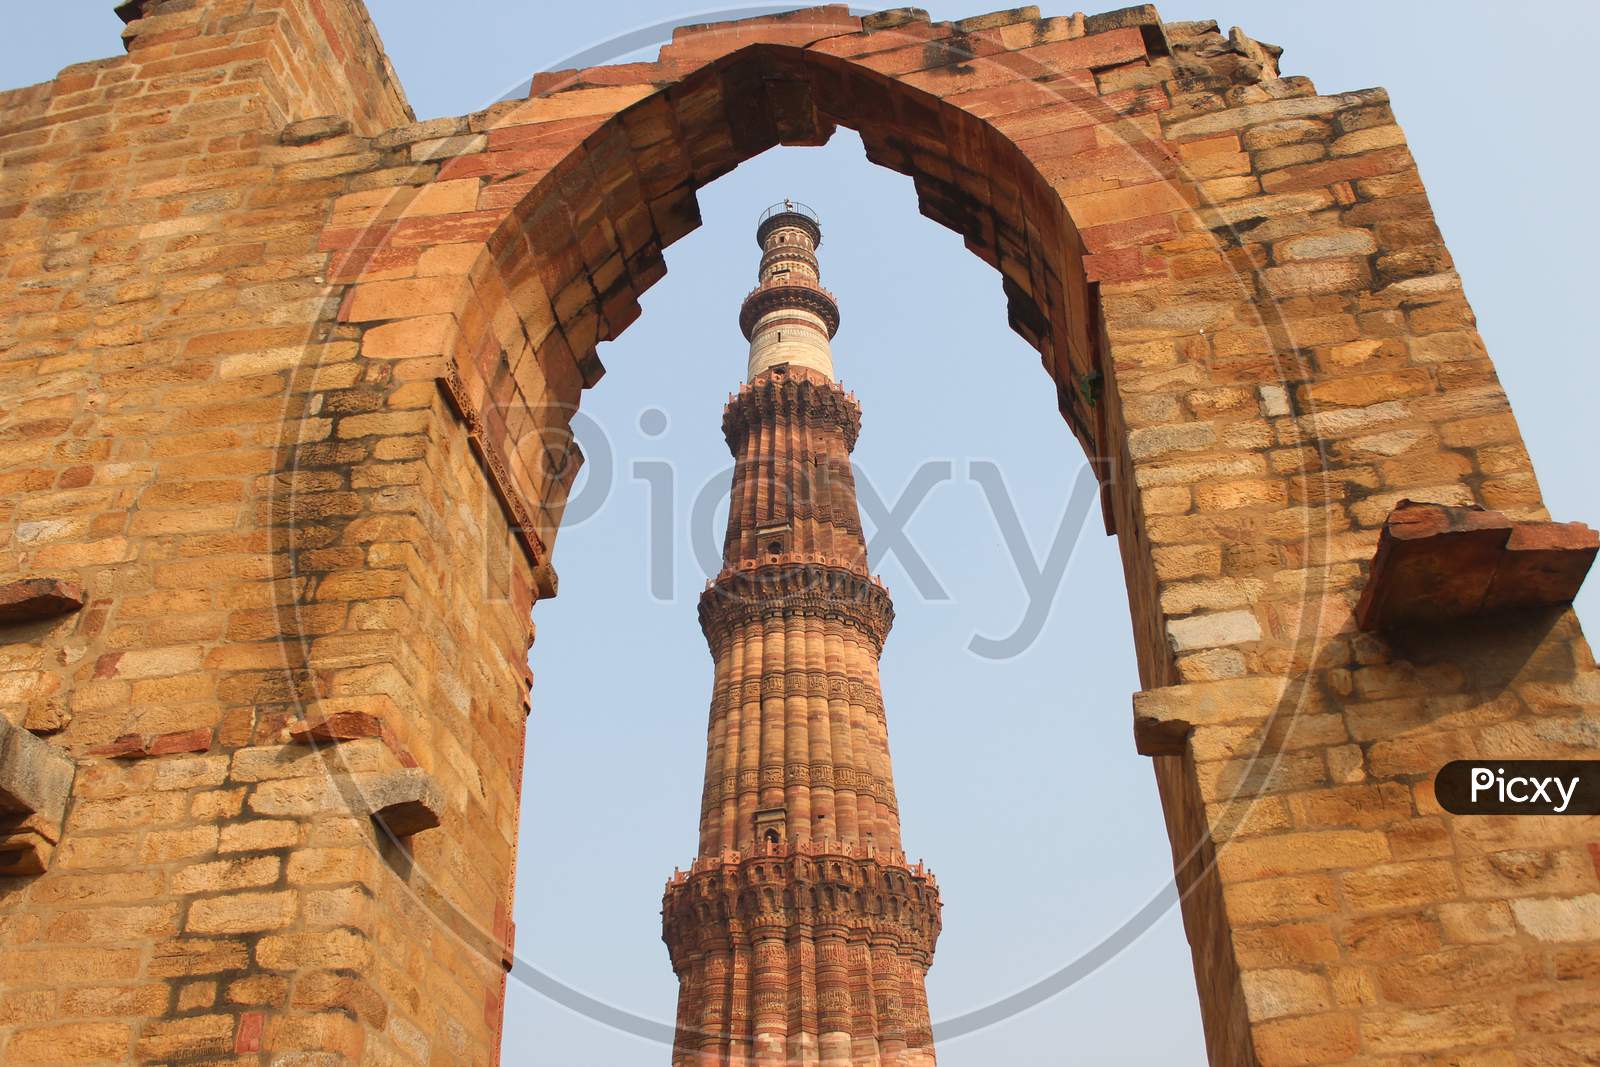 This picture shows a monument called Qutub Minar